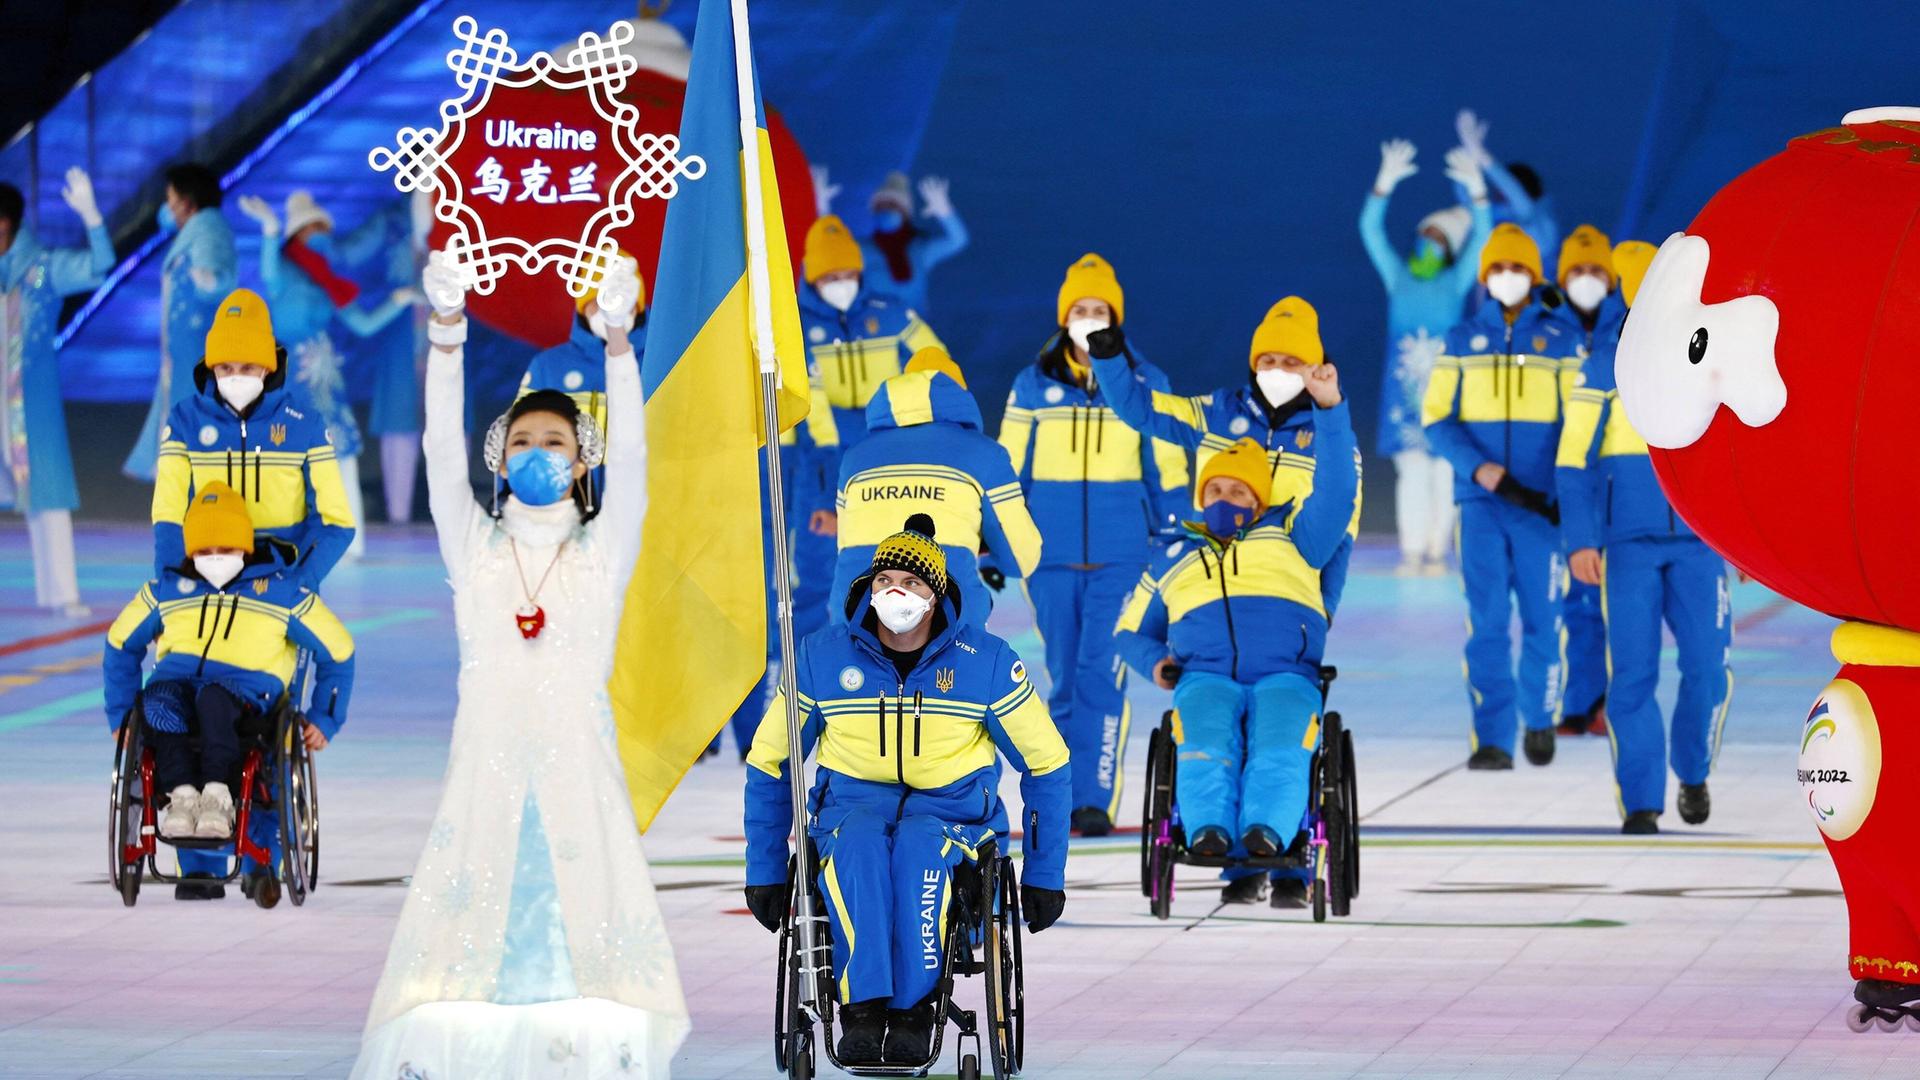 Beijing Paralympics: Opening Ceremony The Ukrainian delegation takes part in the opening ceremony of the Beijing Winter